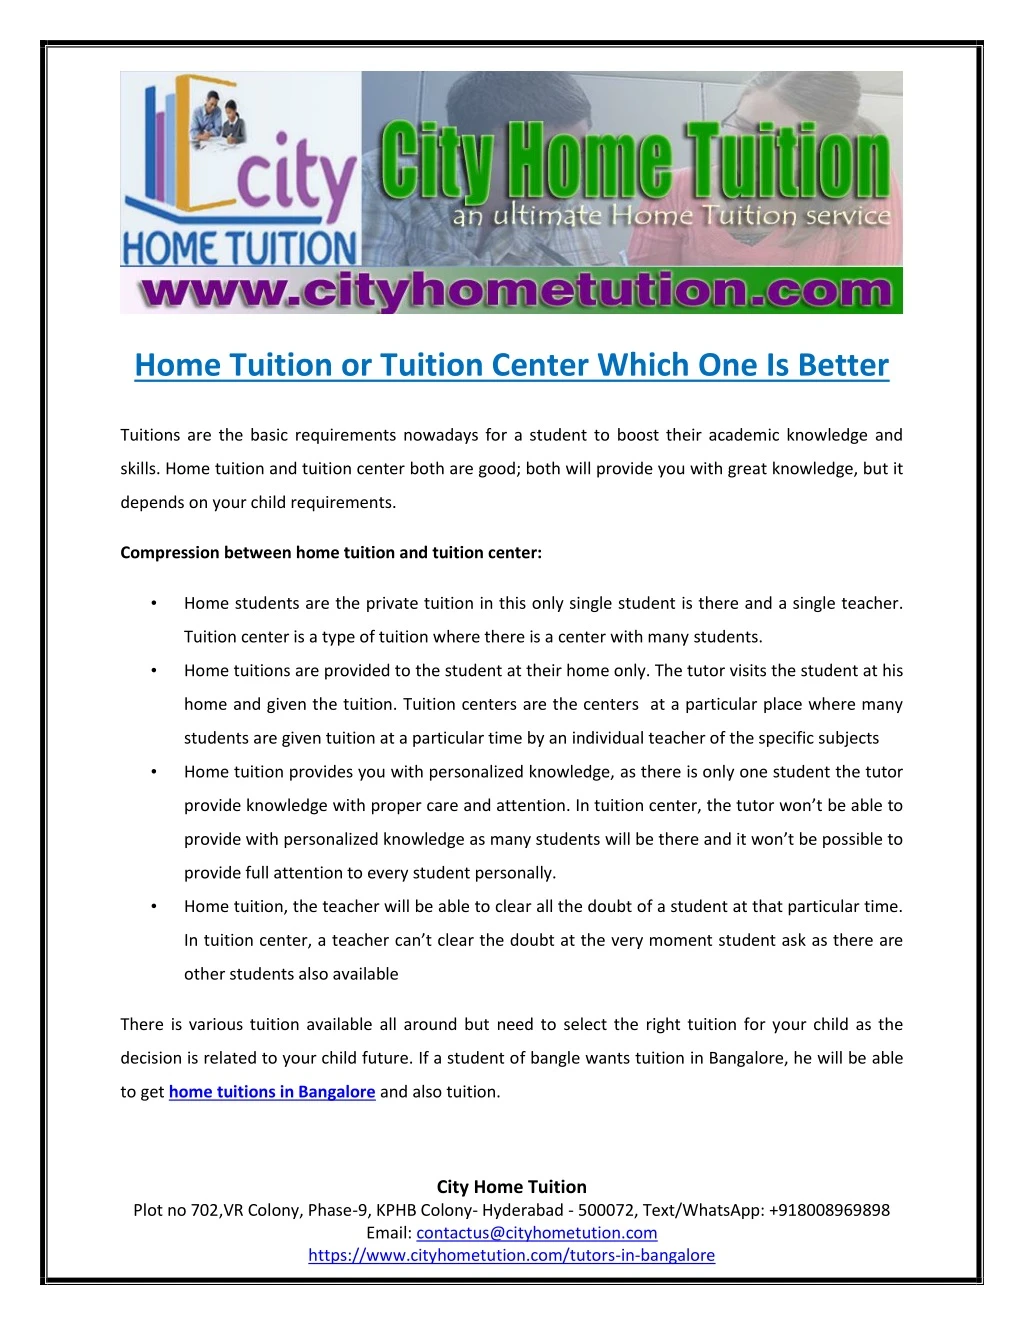 home tuition or tuition center which one is better